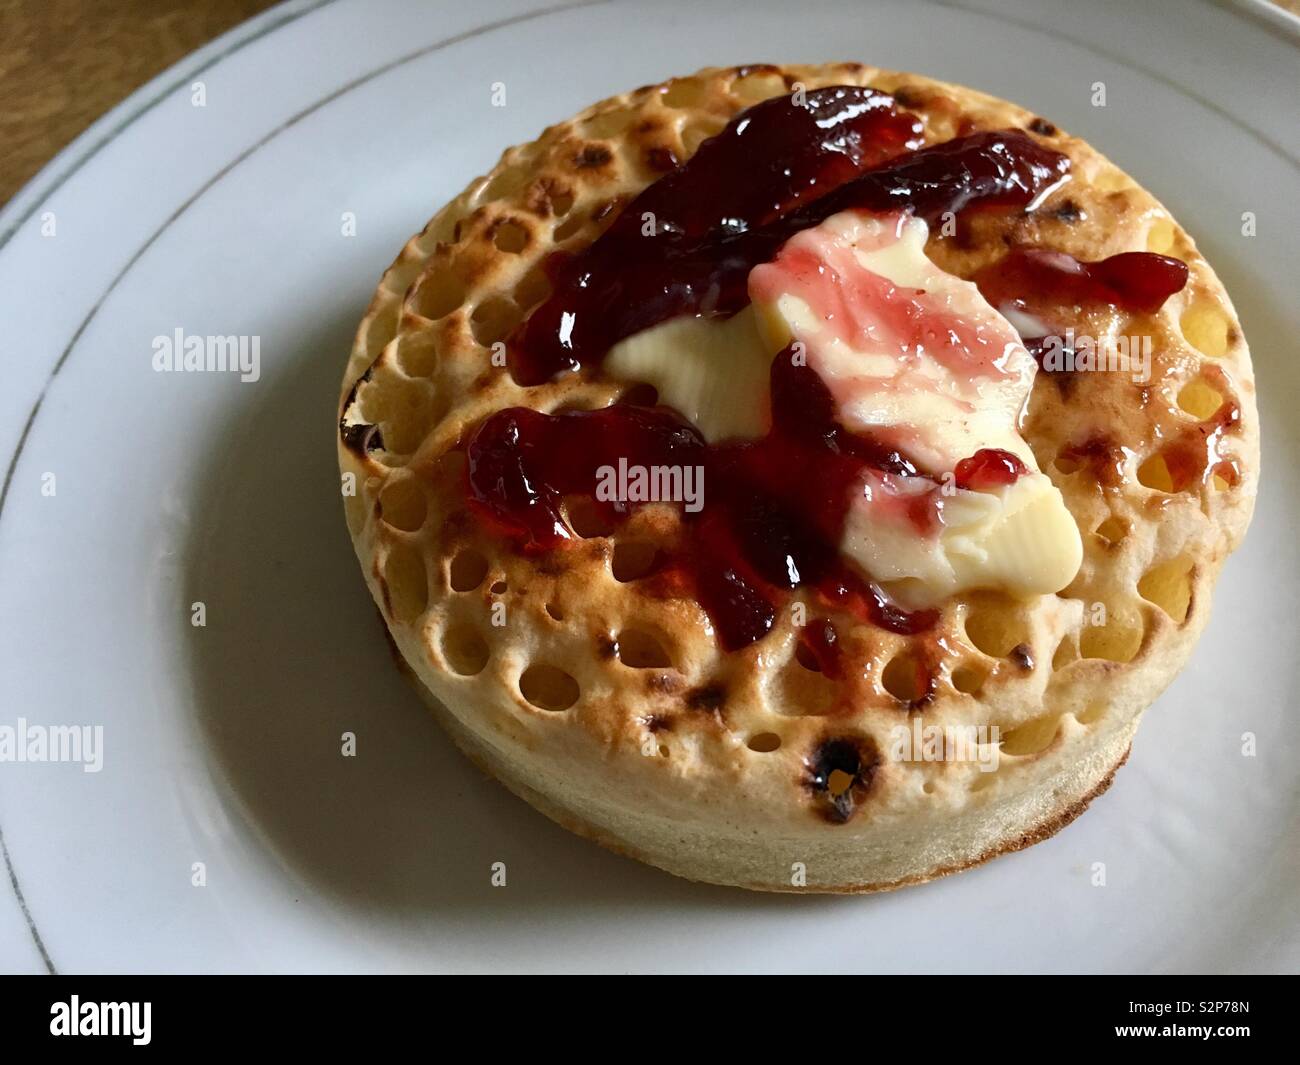 Jam and Butter on top of a crumpet Stock Photo